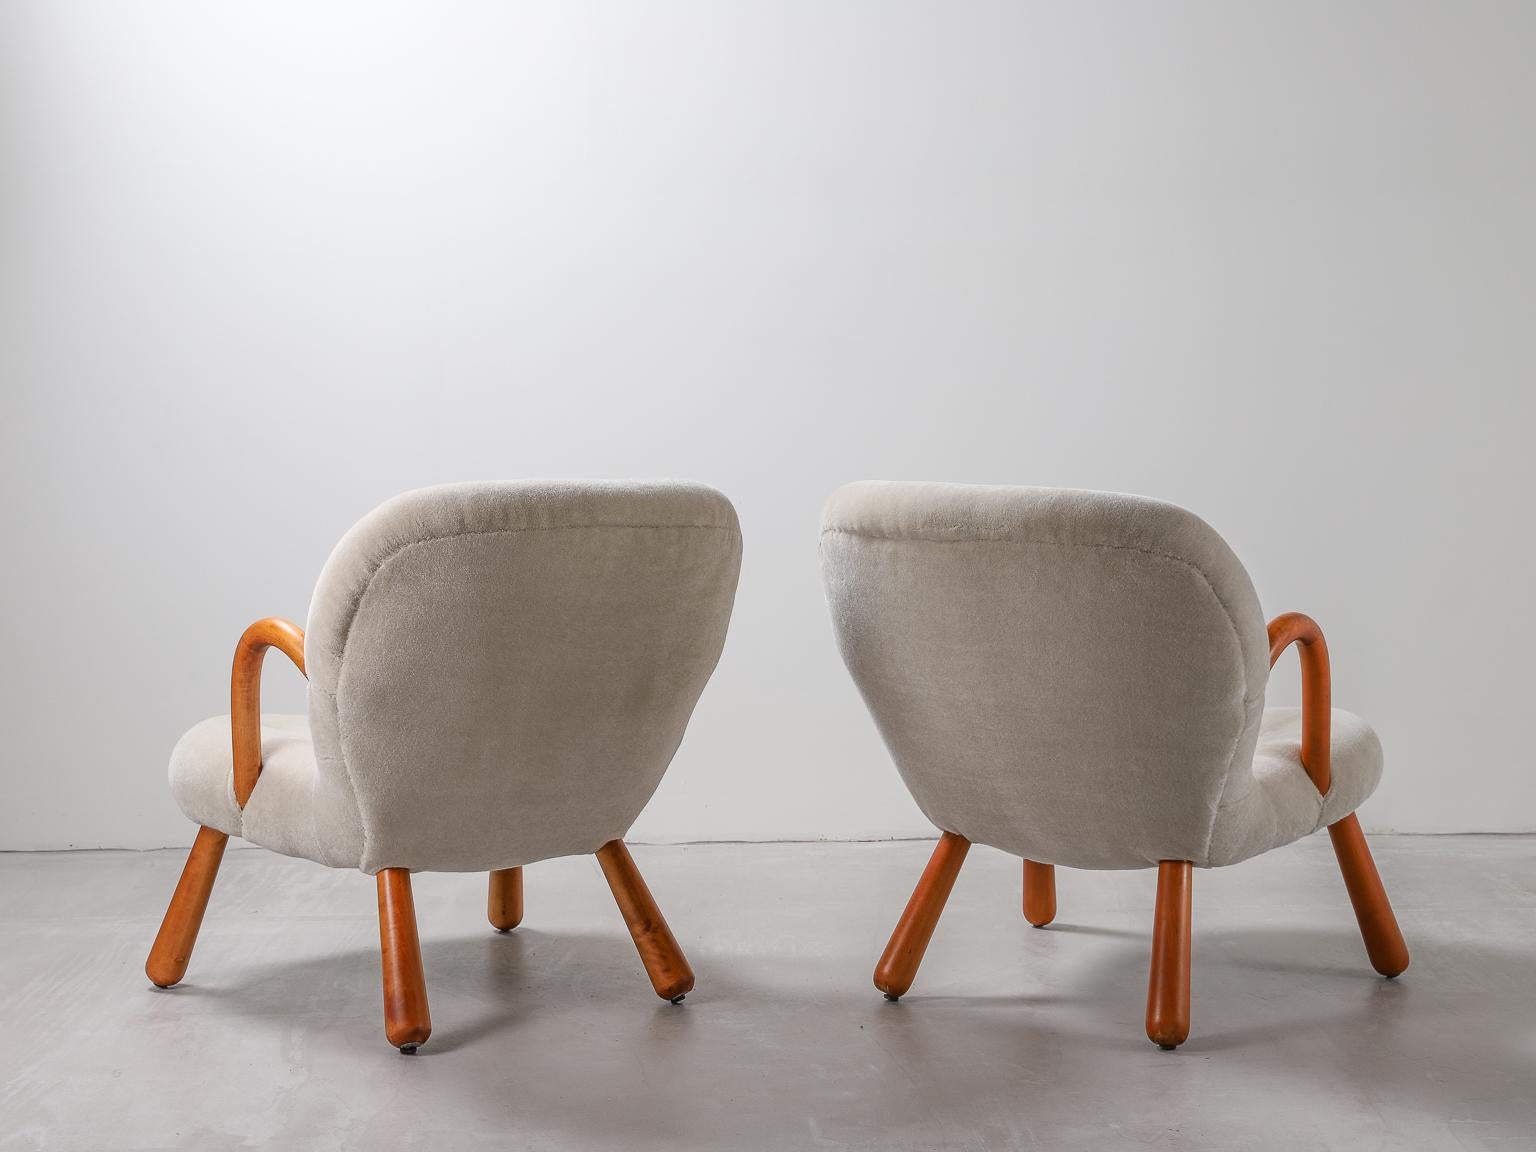 Mid-Century Modern Pair of Clam Chairs by Philip Arctander 1944 in Bespoke Mohair Velvet